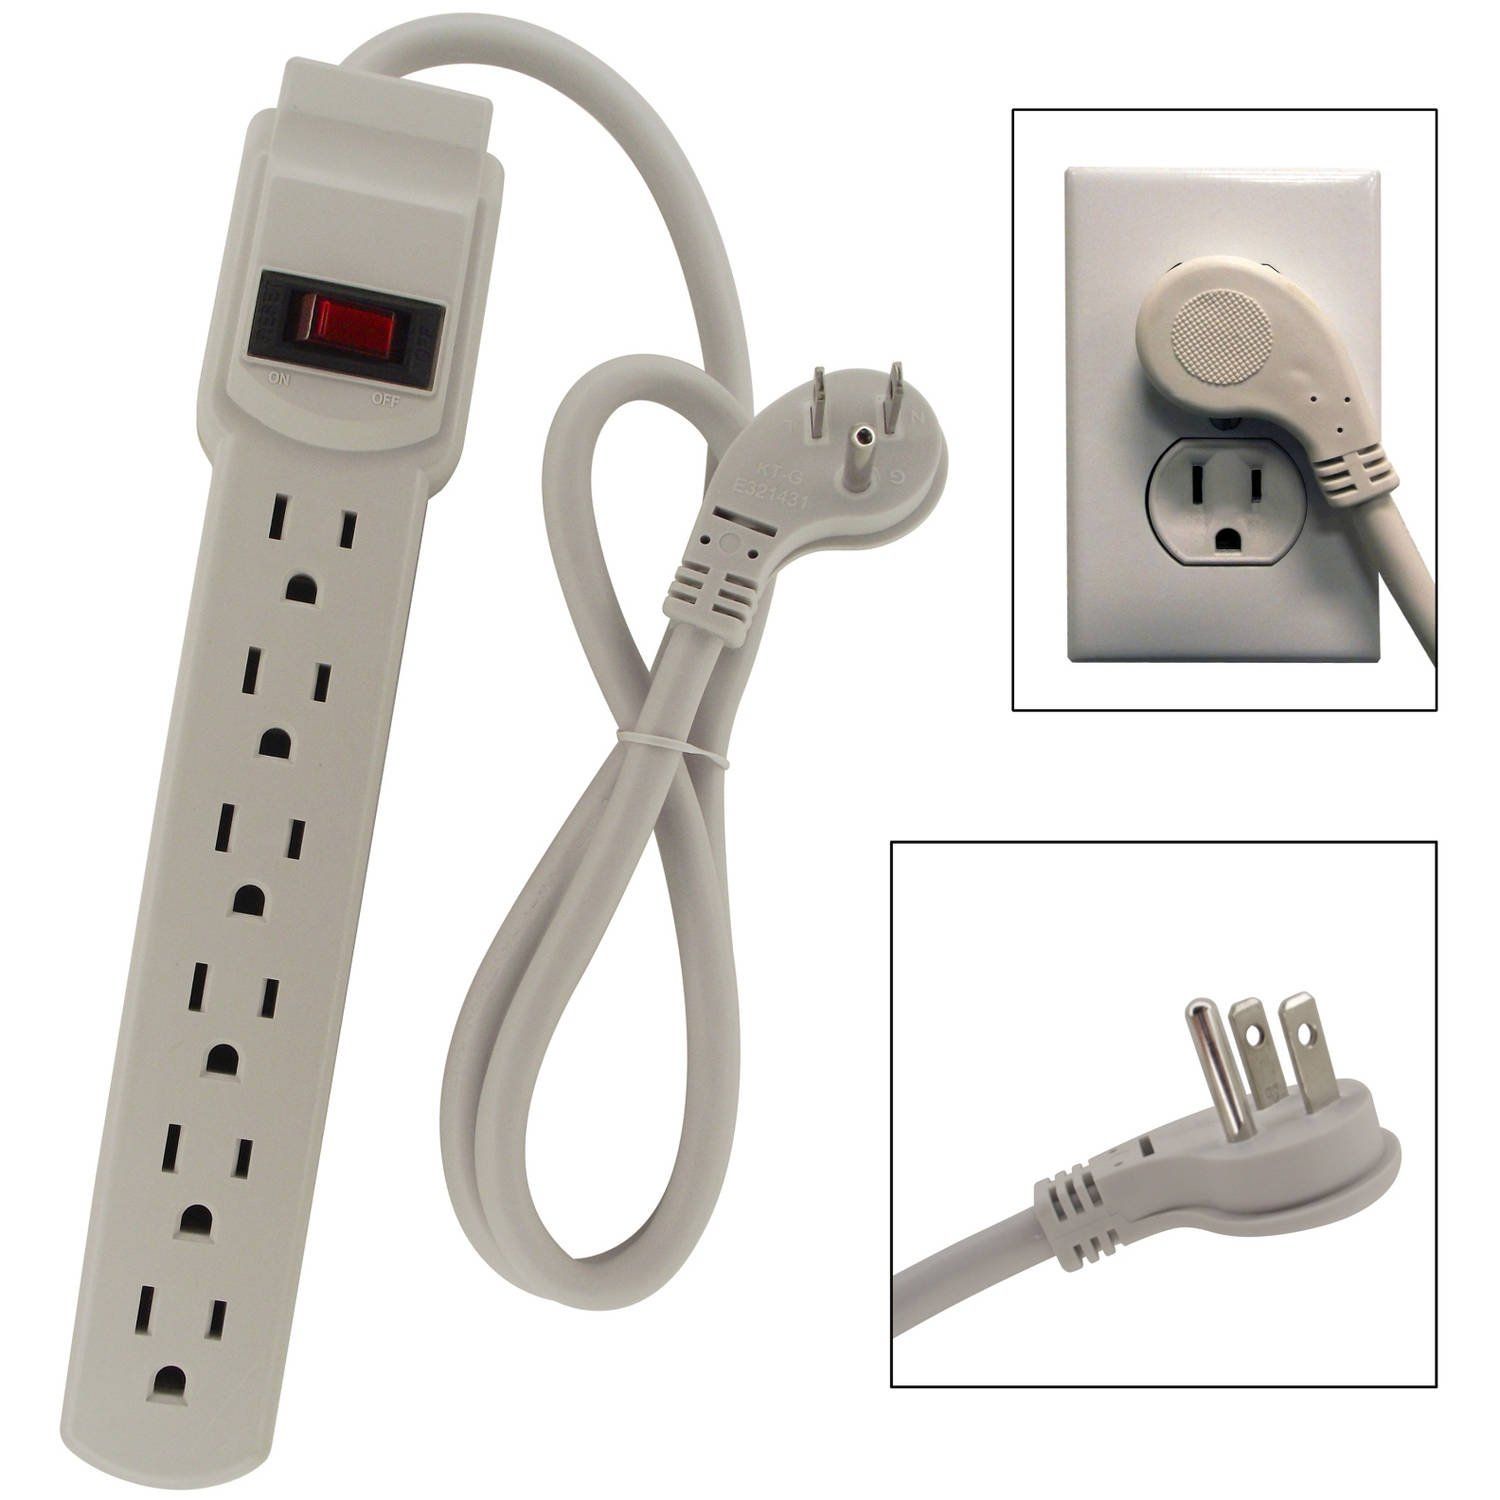 Electrical power strip for bathrooms